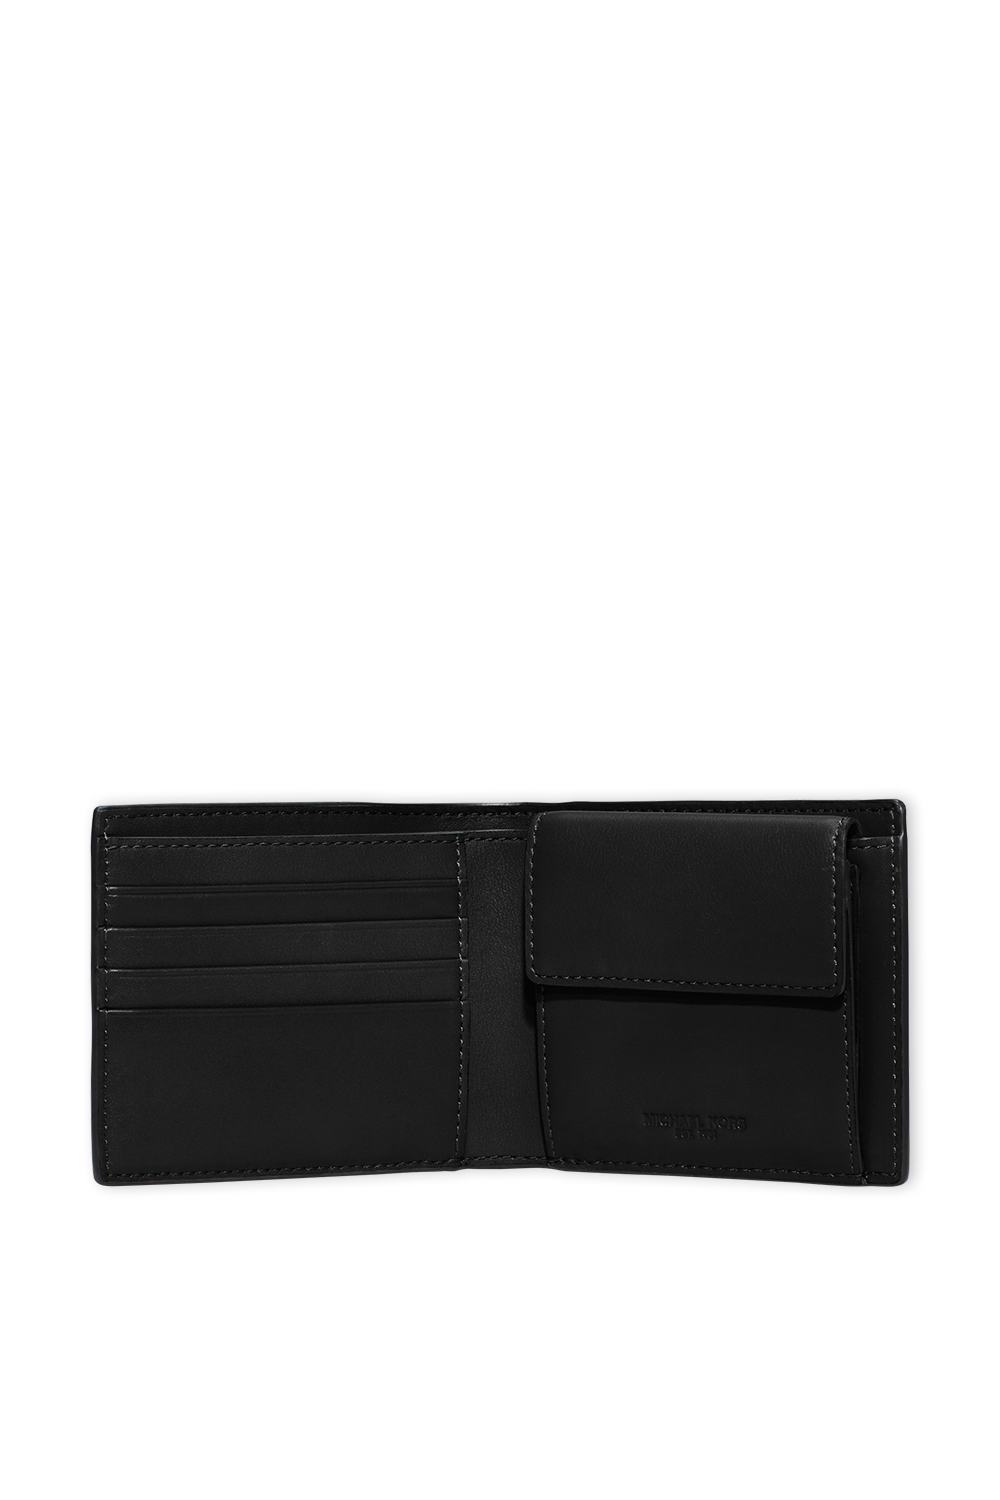 Billfold with Coin Pocket in Black MICHAEL KORS